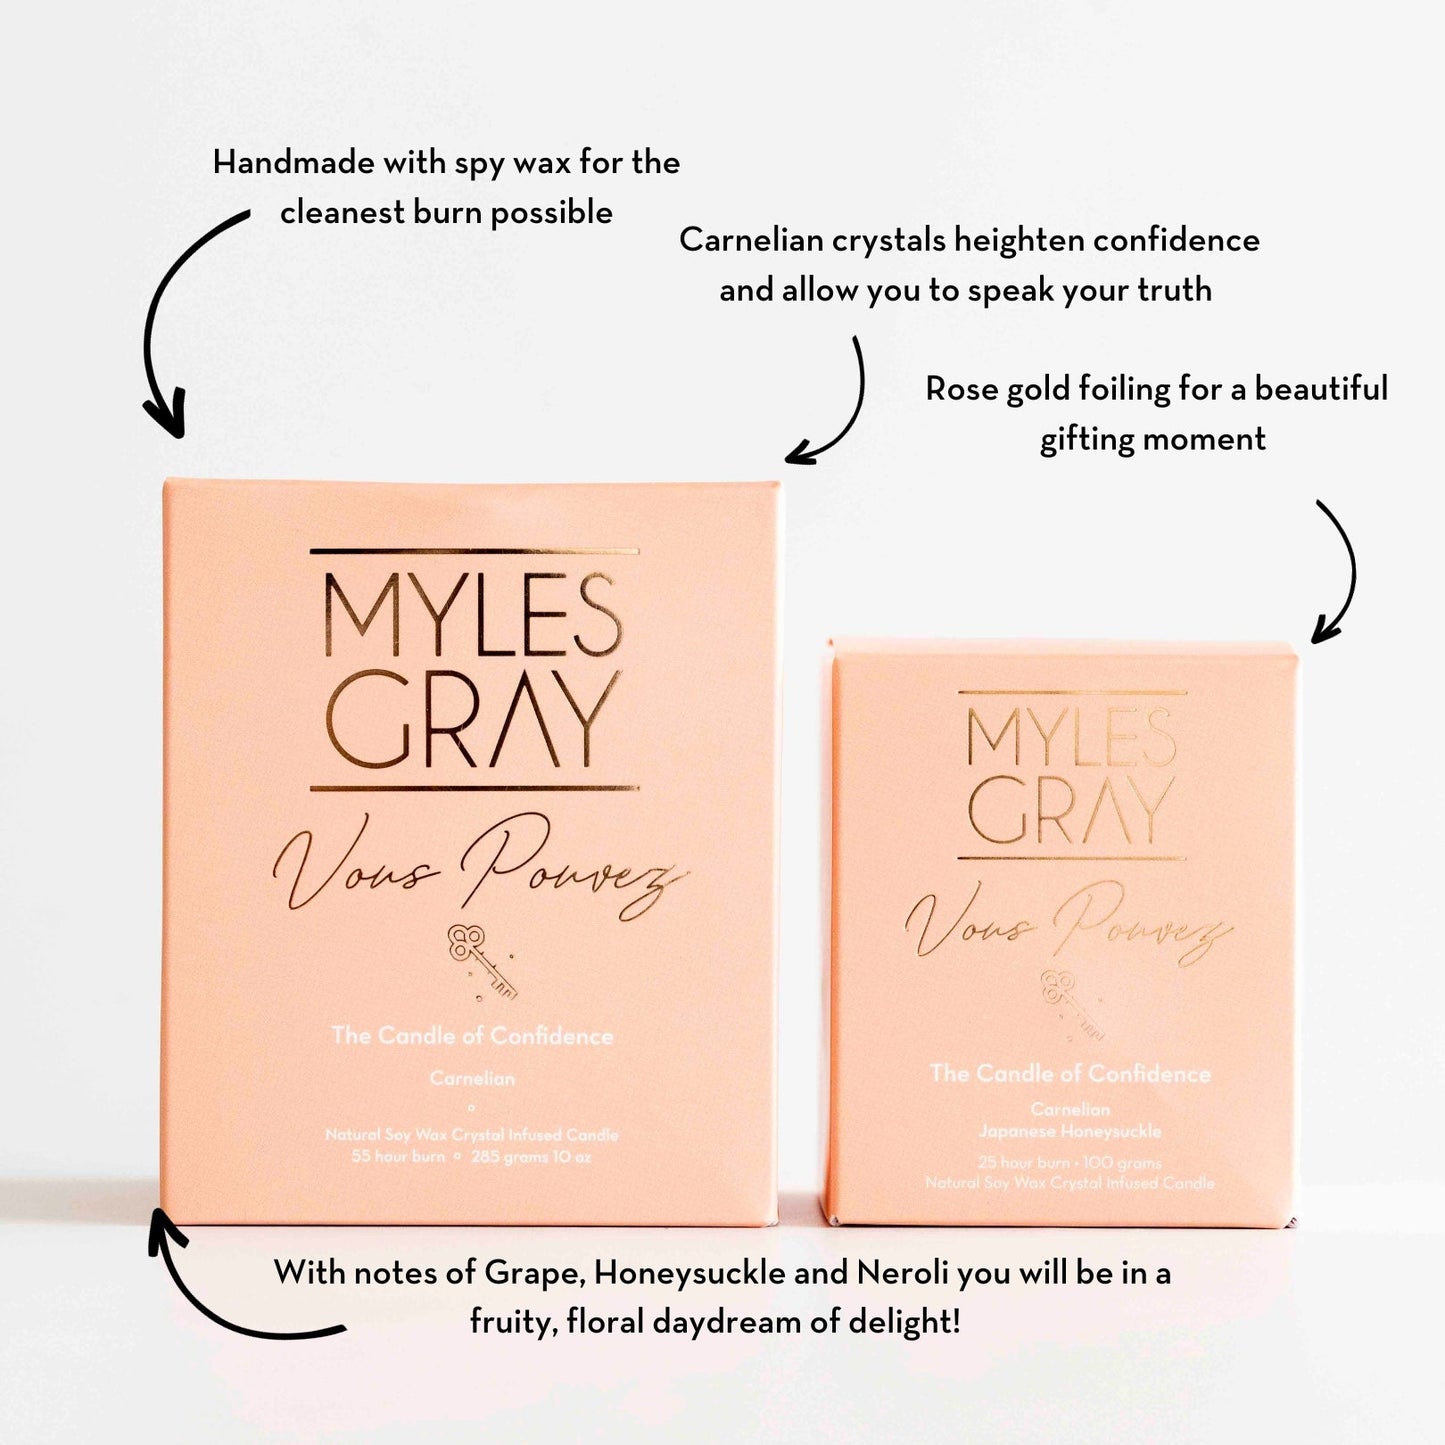 Vous Pouvez | The Candle of Confidence - Myles Gray